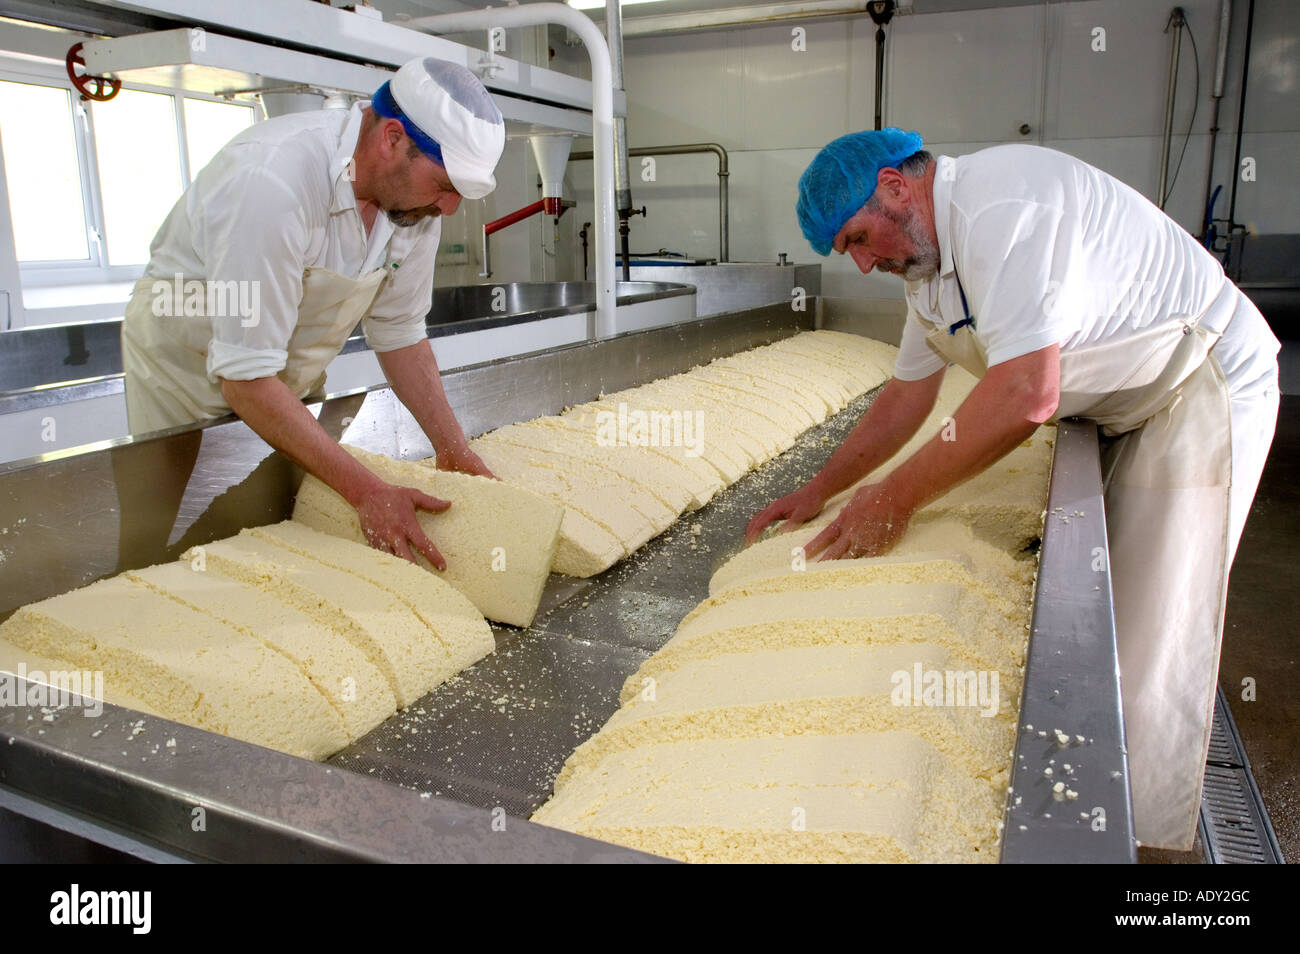 Splitting the curd and draining off the whey to make Traditional Farmhouse Cheddar Cheese Westcombe Dairy Evercreech Somerset Stock Photo